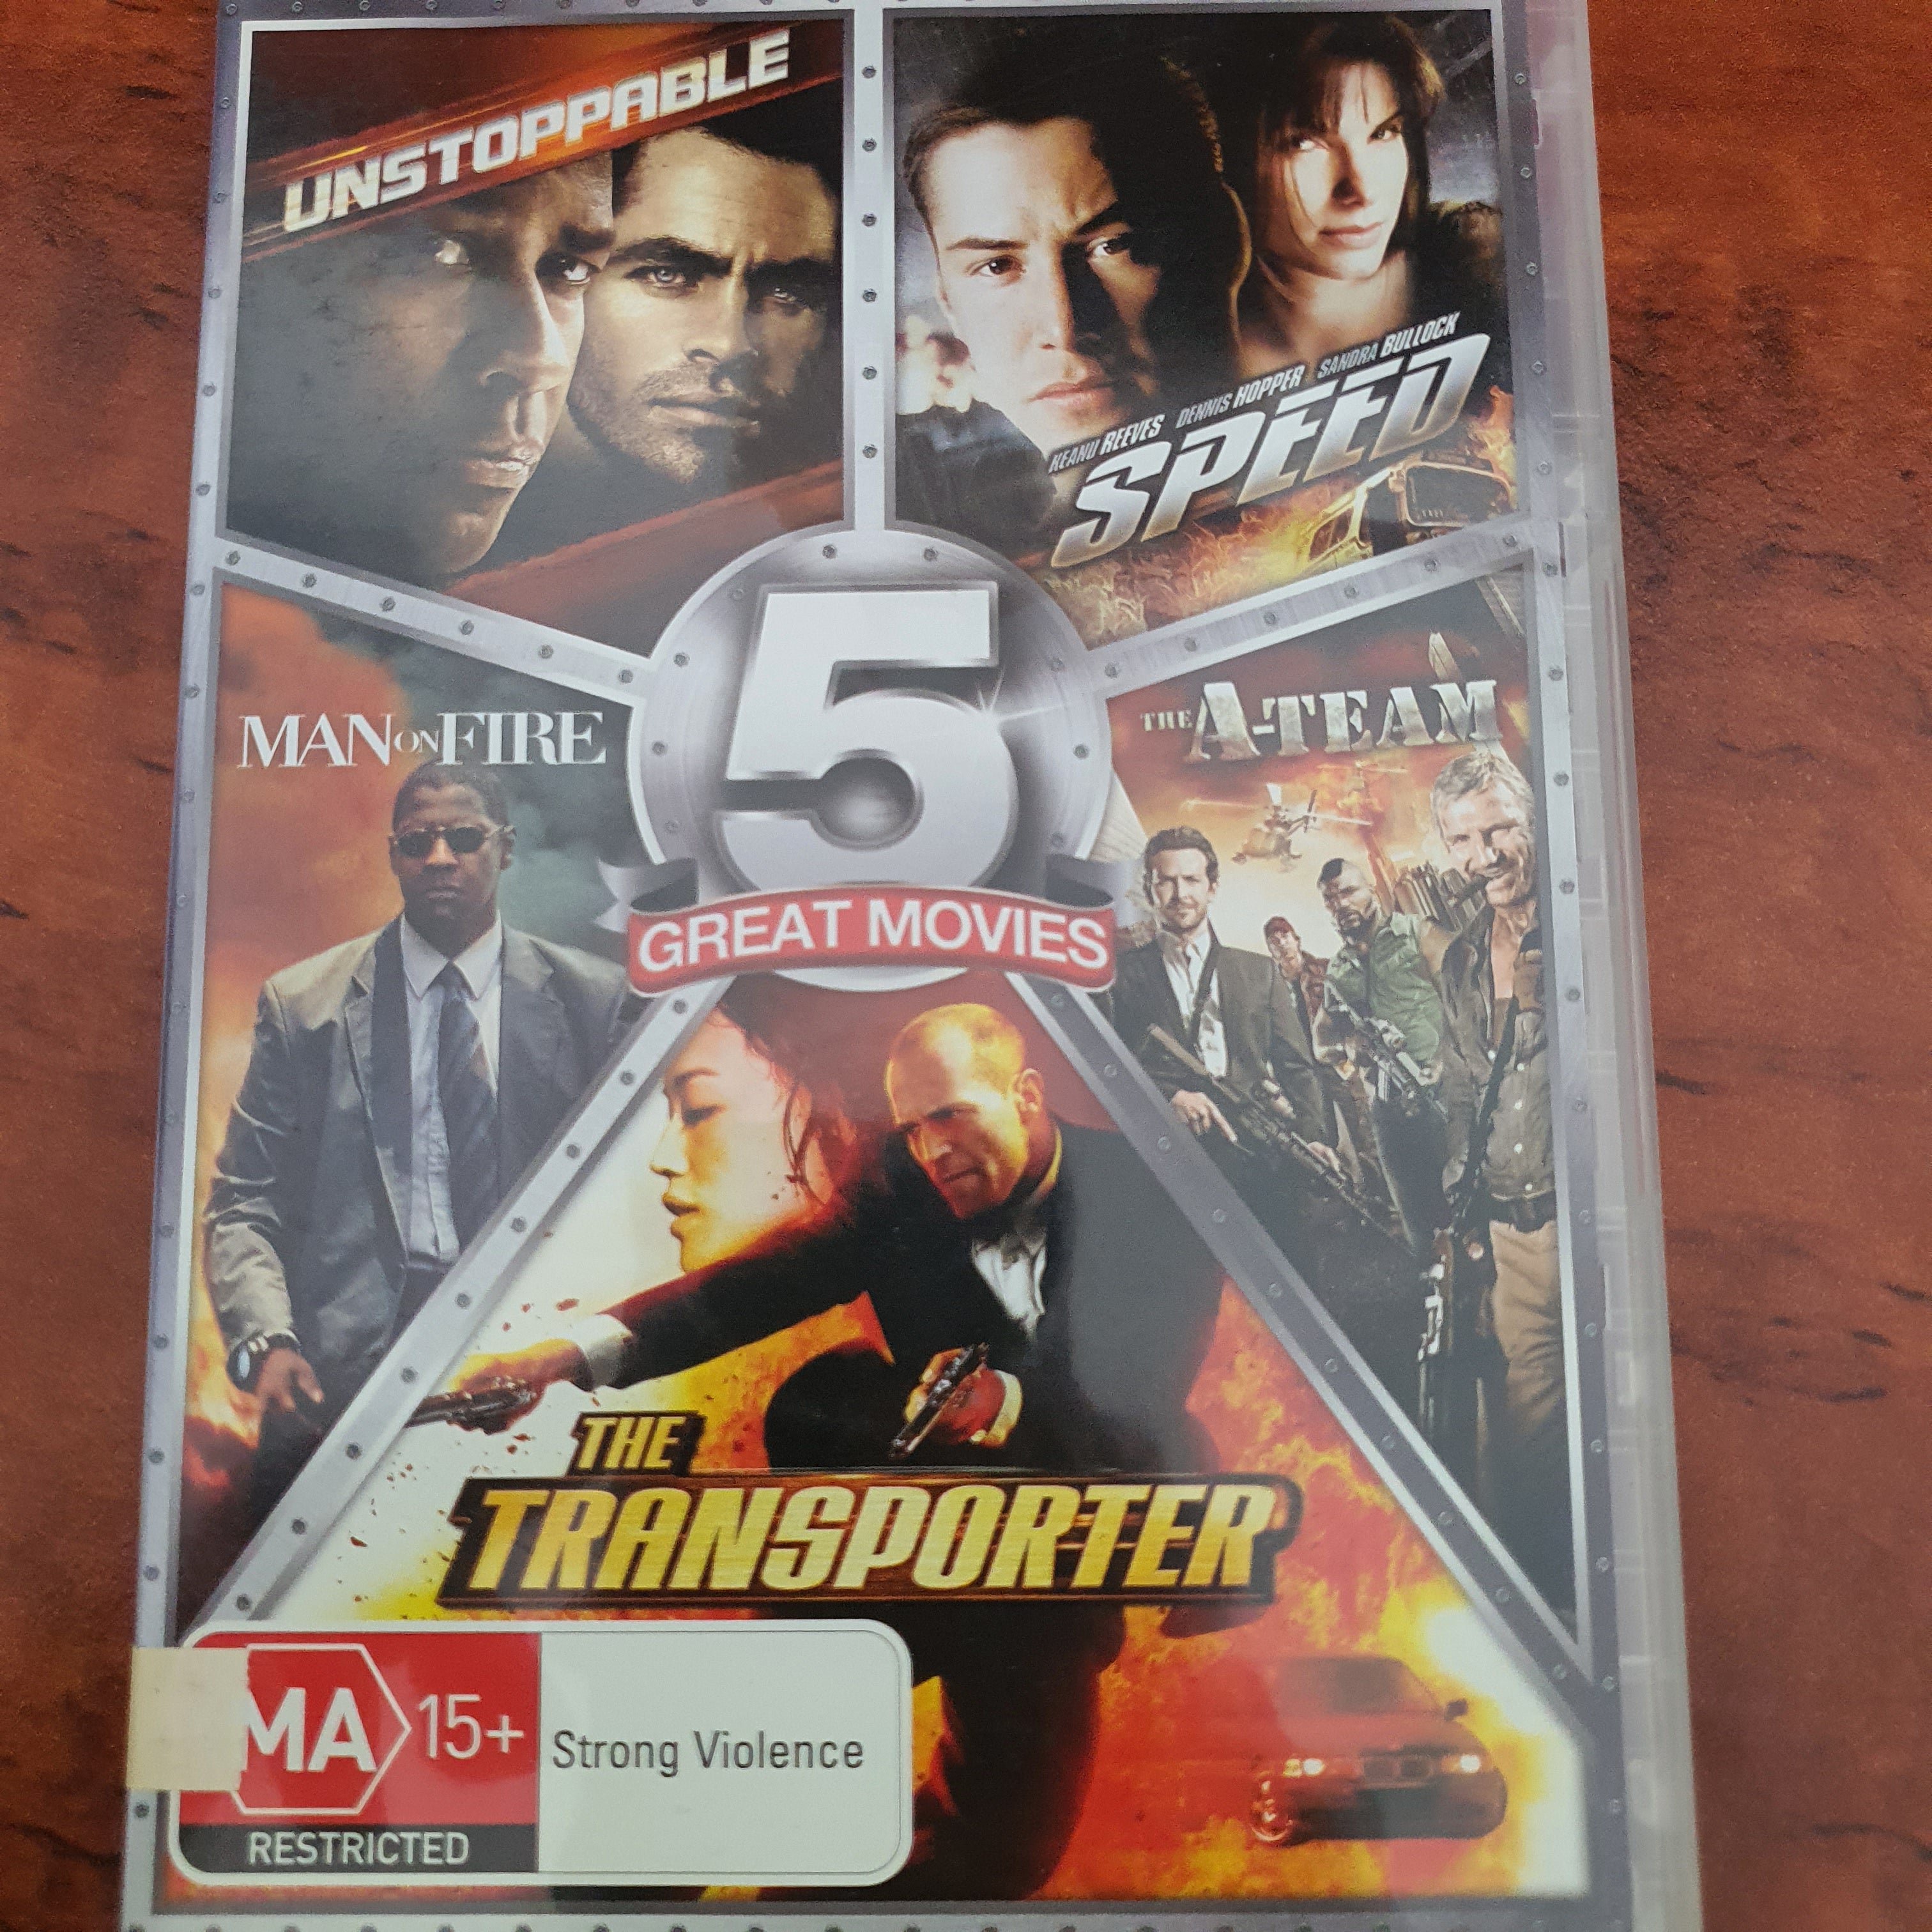 5 MOVIE ADVENTURE. UNSTOPPABLE, SPPED, MAN ON FIRE, THE TRANSPORTER, A-TEAM